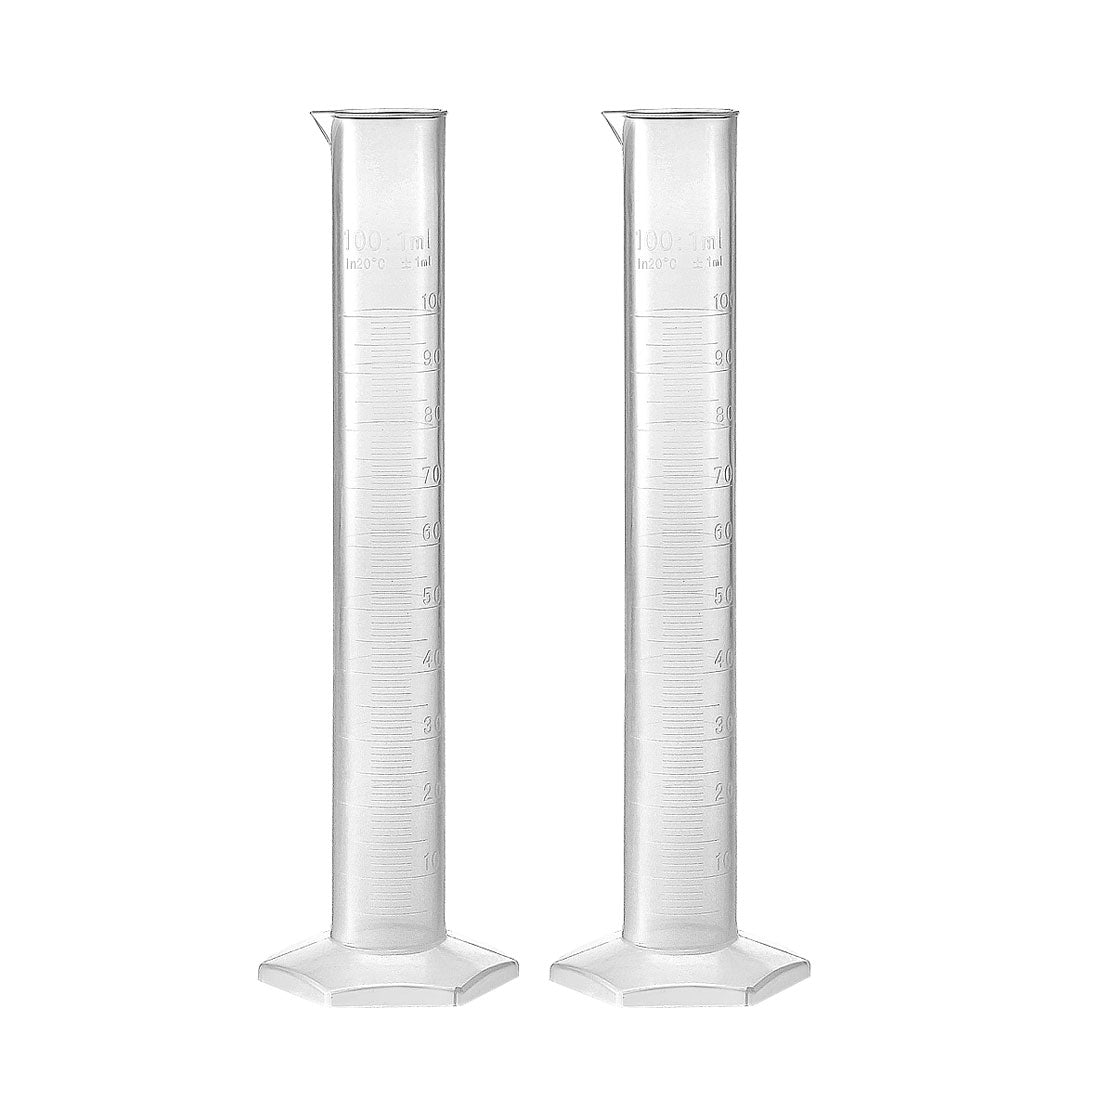 uxcell Uxcell 100ml Laboratory Measurements Clear White Plastic Hex Base Graduated Cylinder for Chemical Measuring 2 Pcs